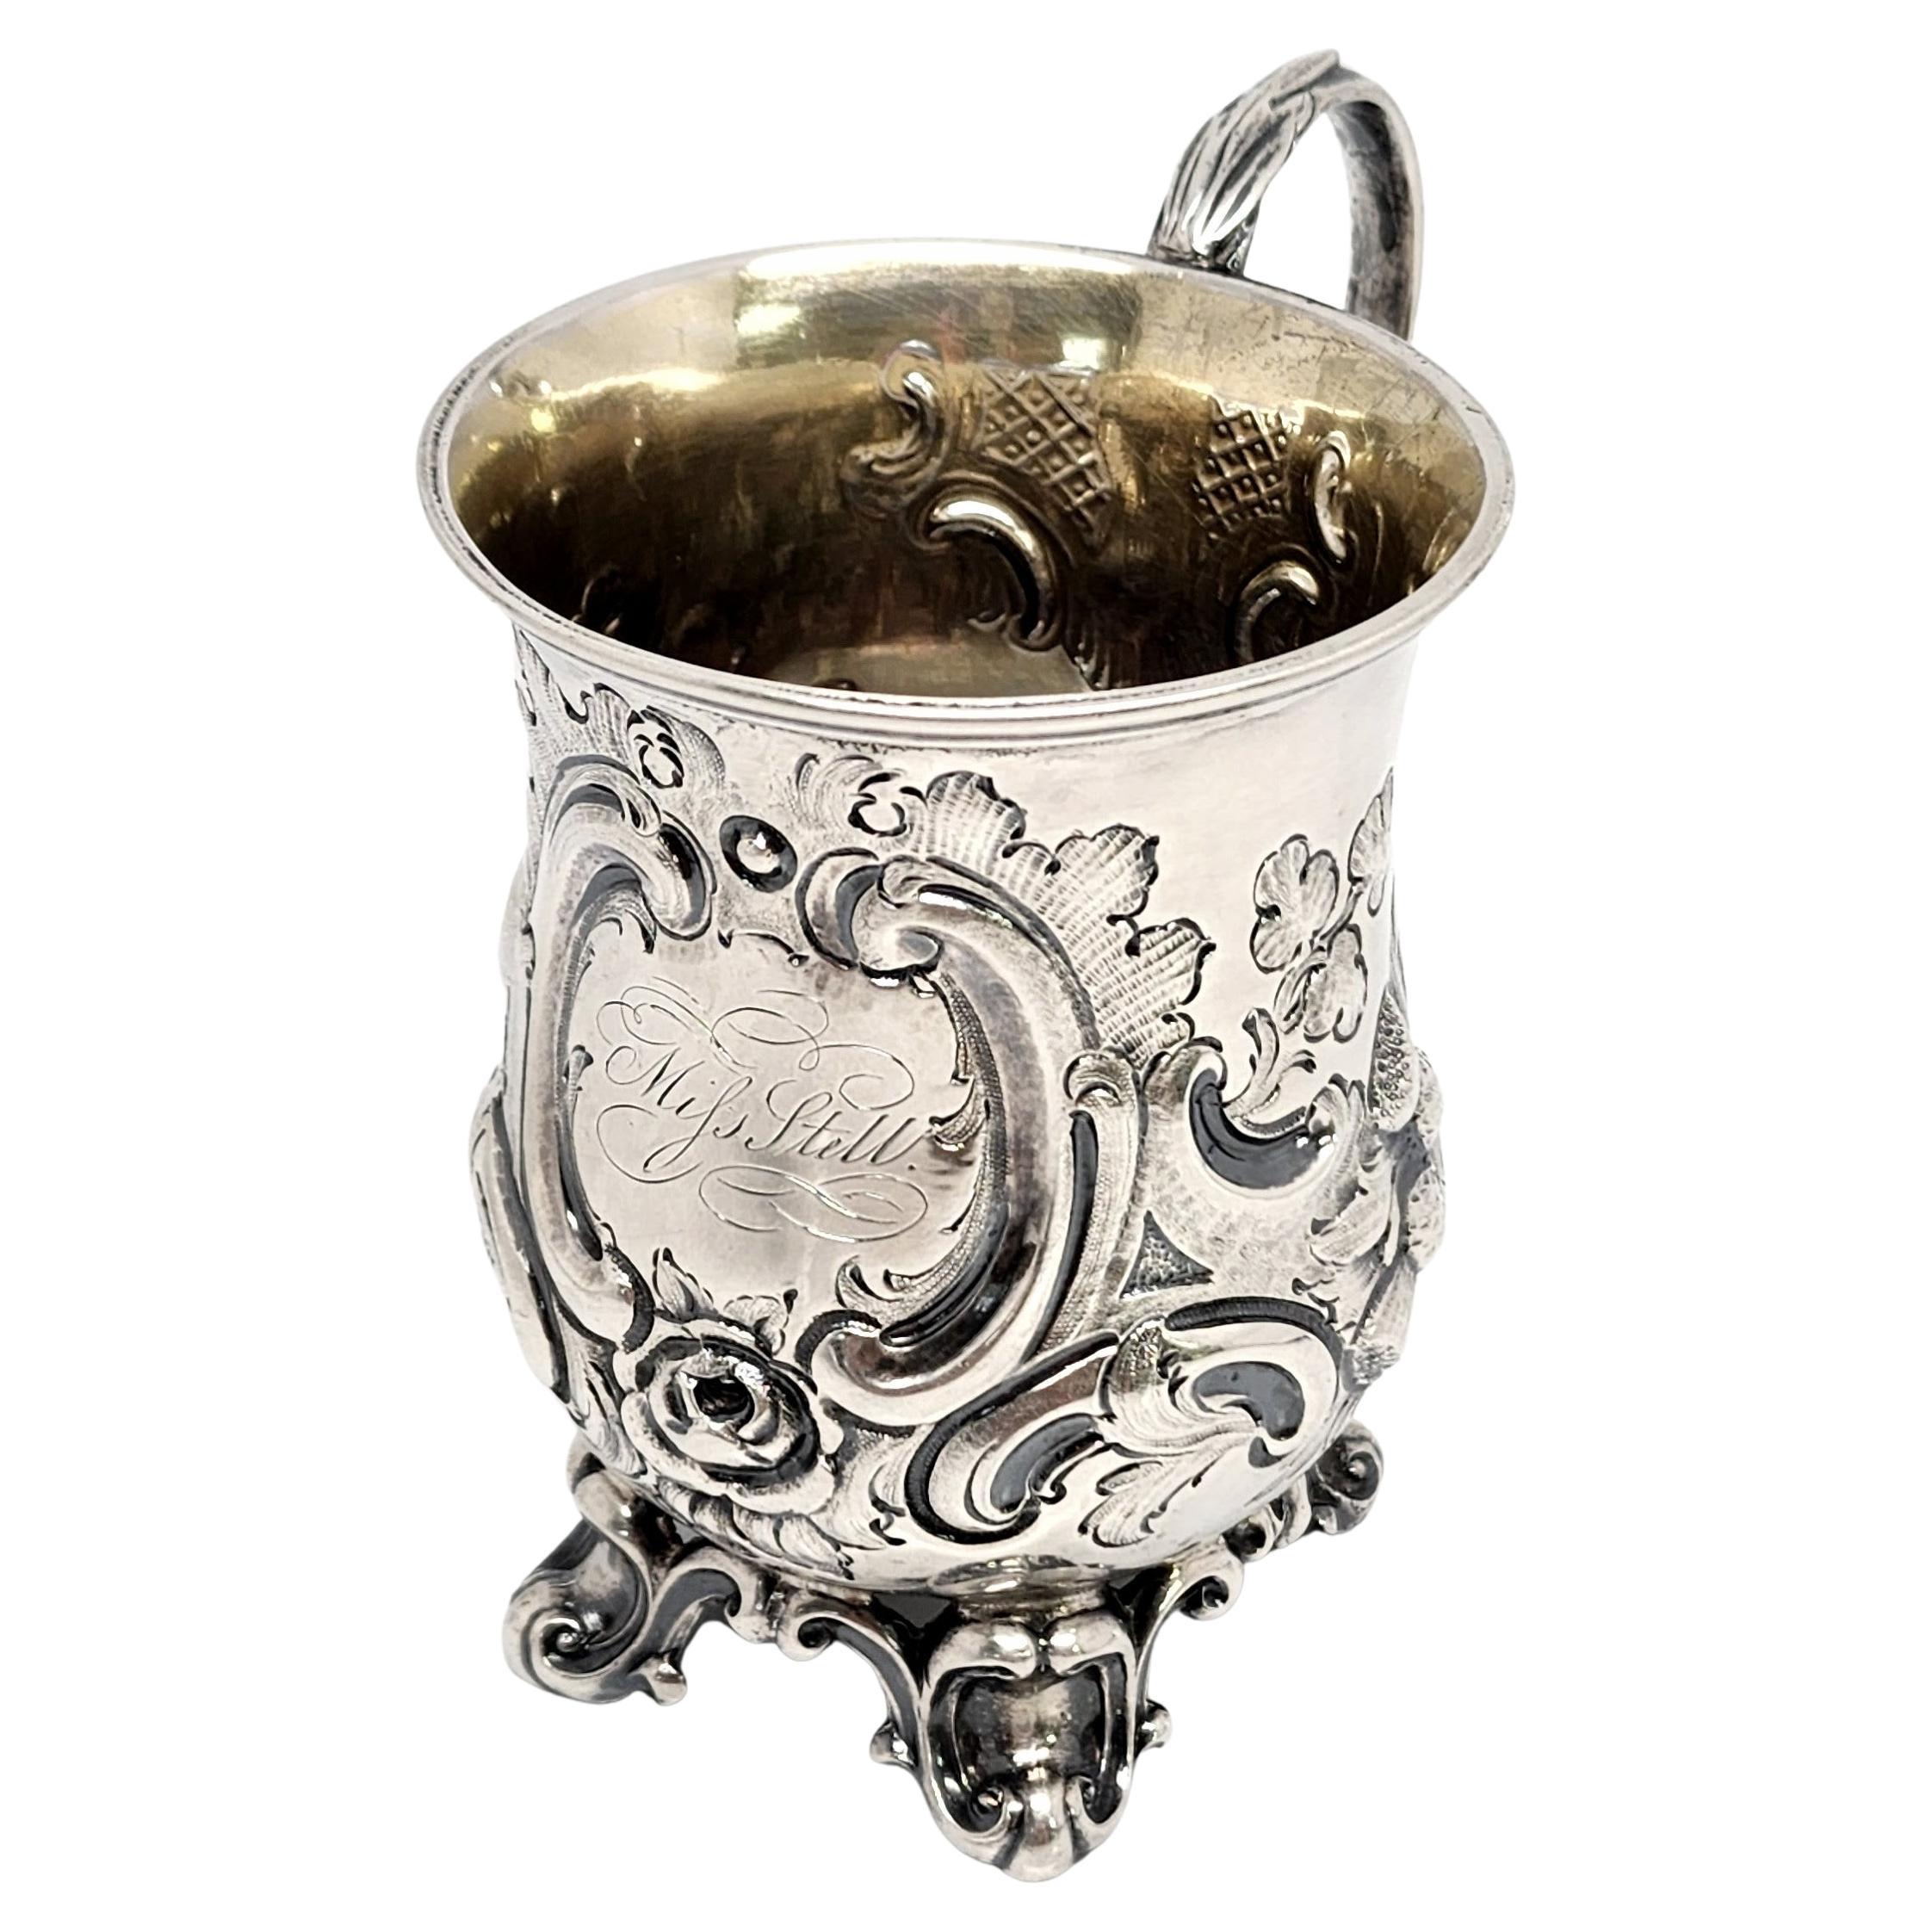 Antique George Angell London England Sterling Silver Footed Cup with Monogram